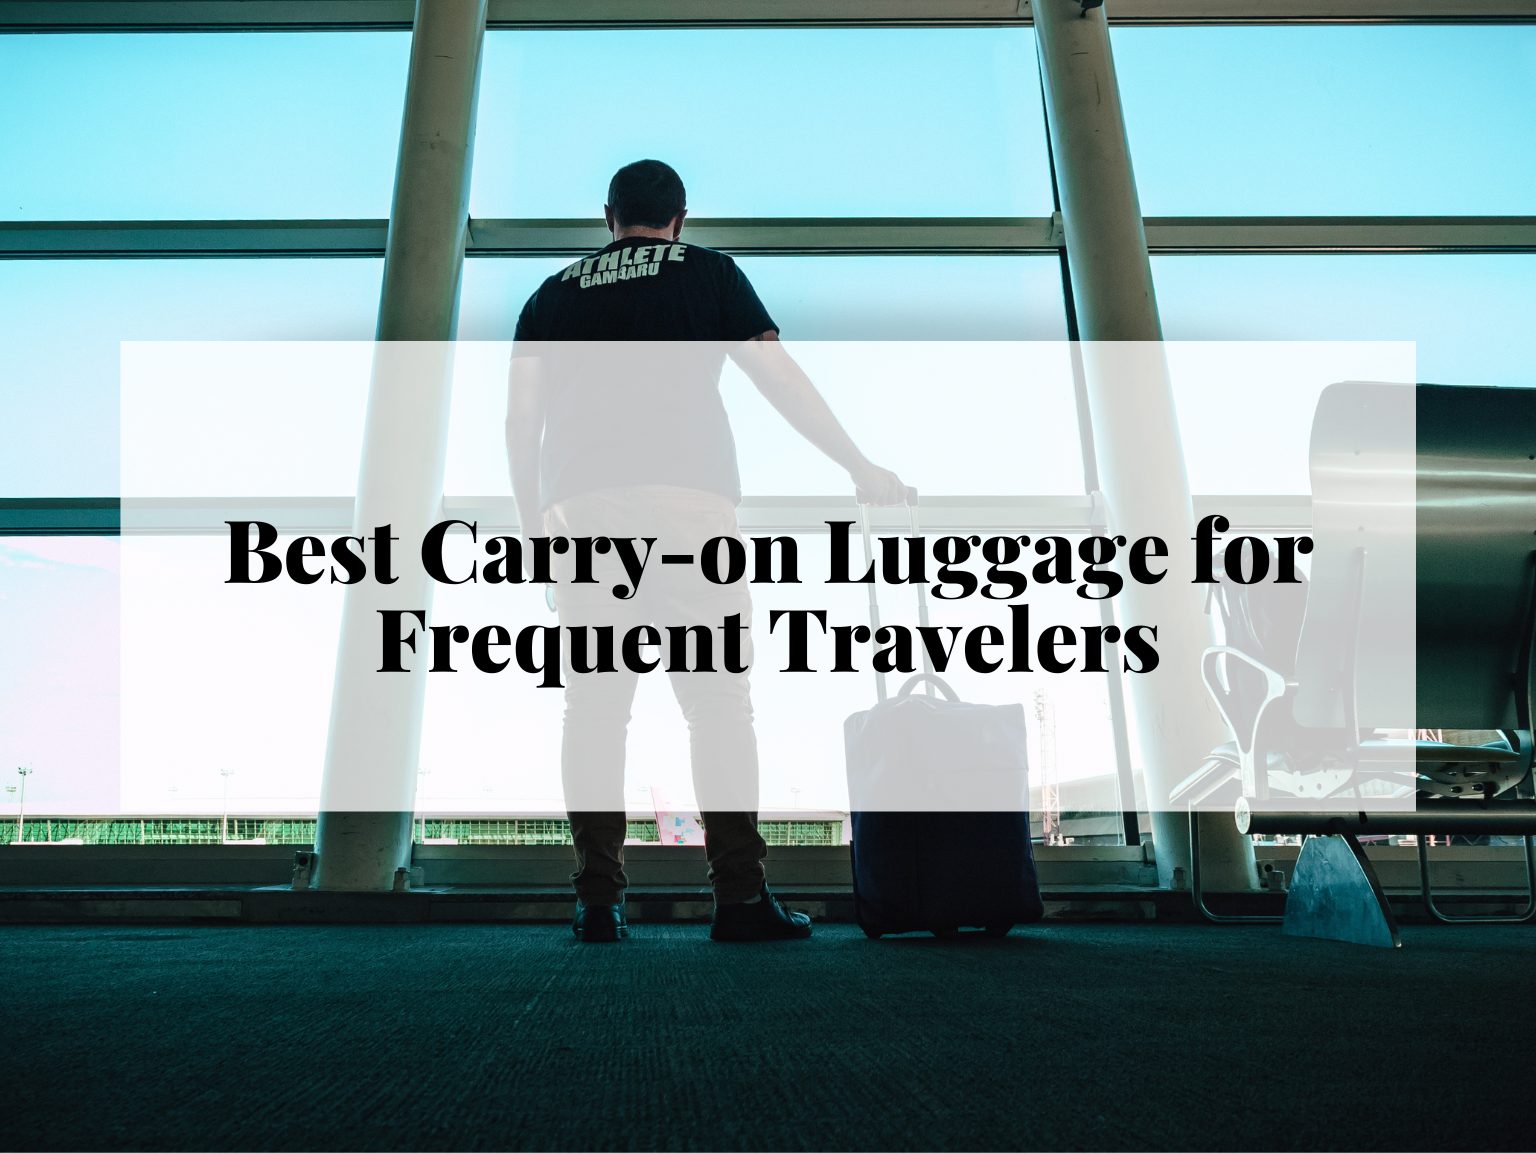 Best Carry-on Luggage for Frequent Travelers